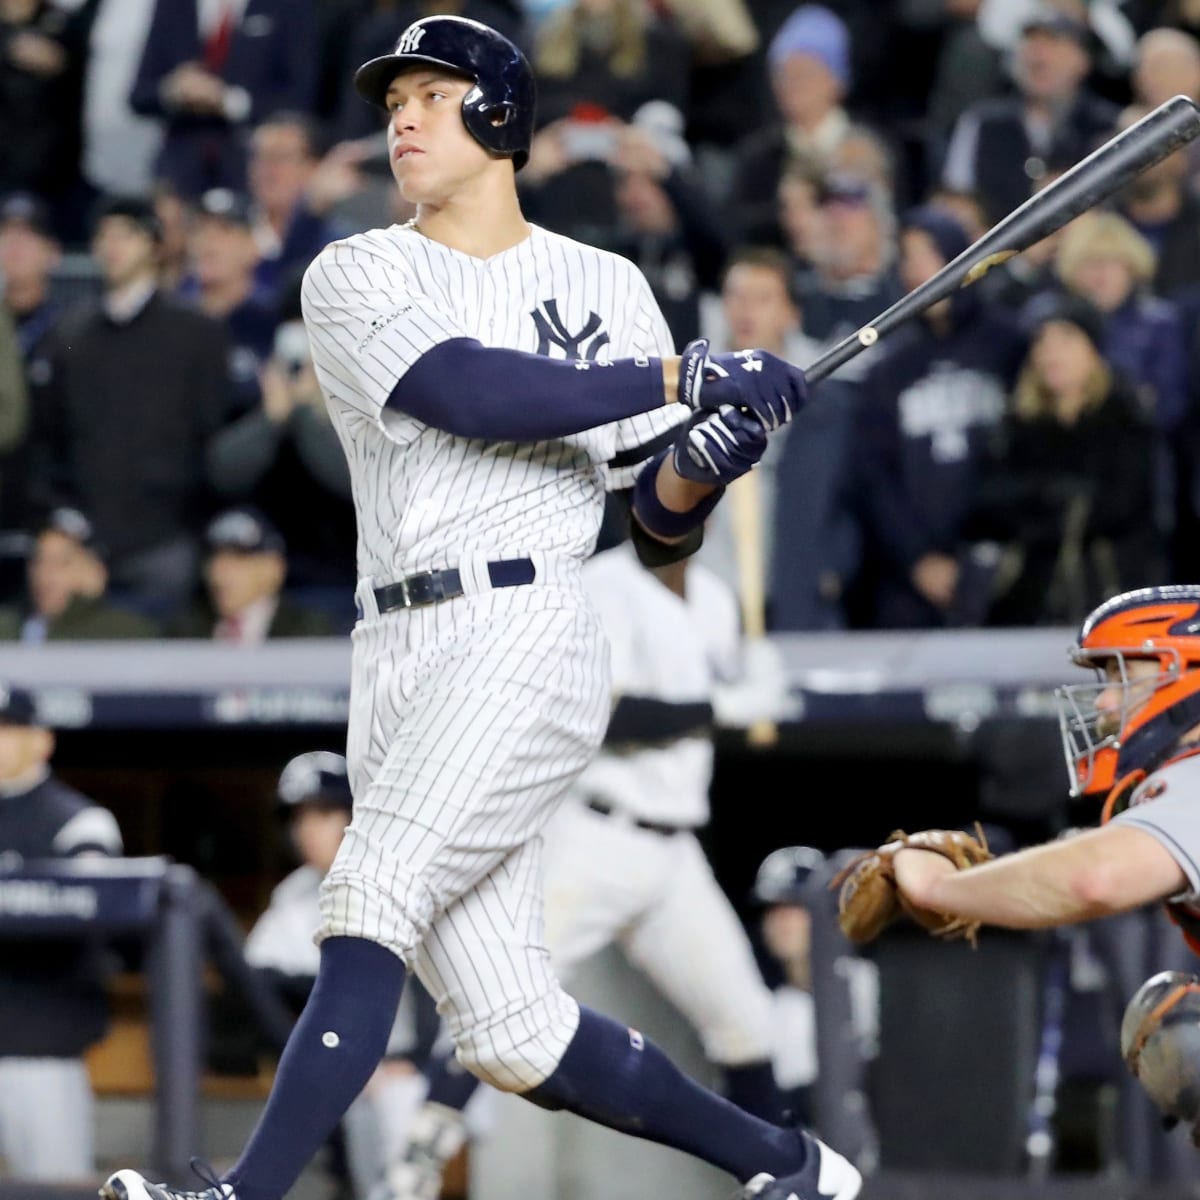 Punchless Yankees feel Game 3 pressure vs. the Astros